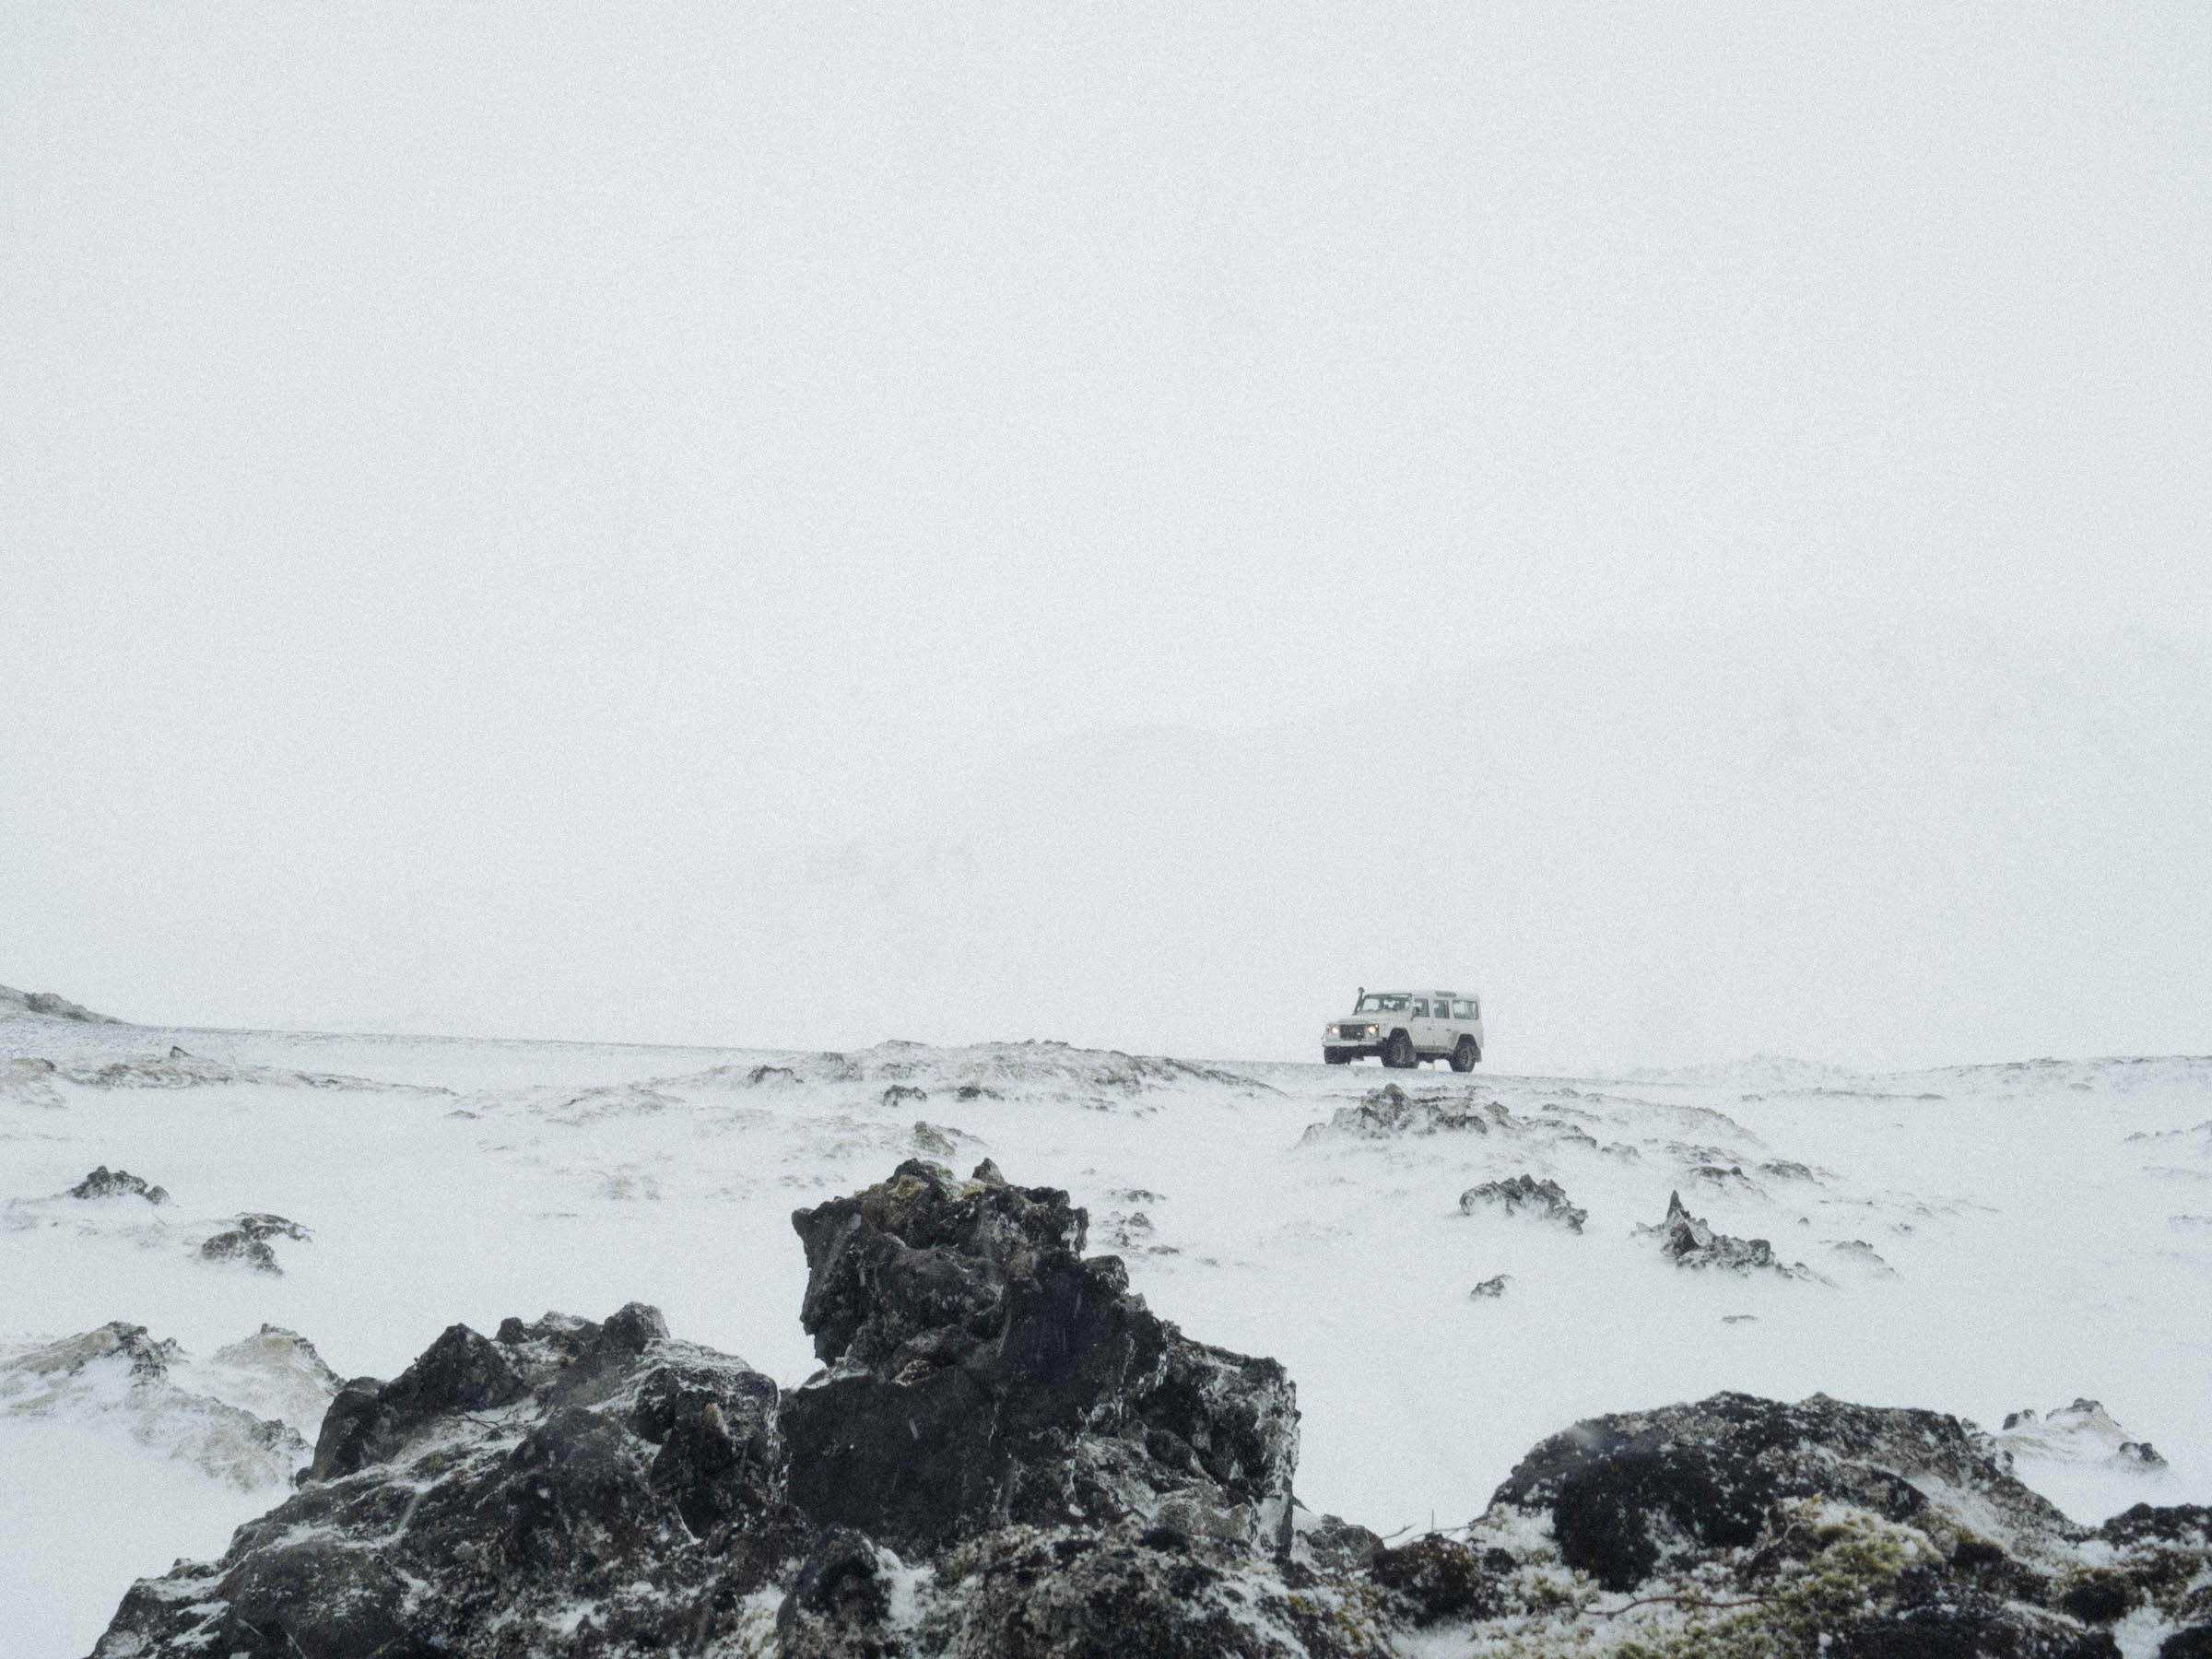 A car driving in a snowstorm in Iceland.